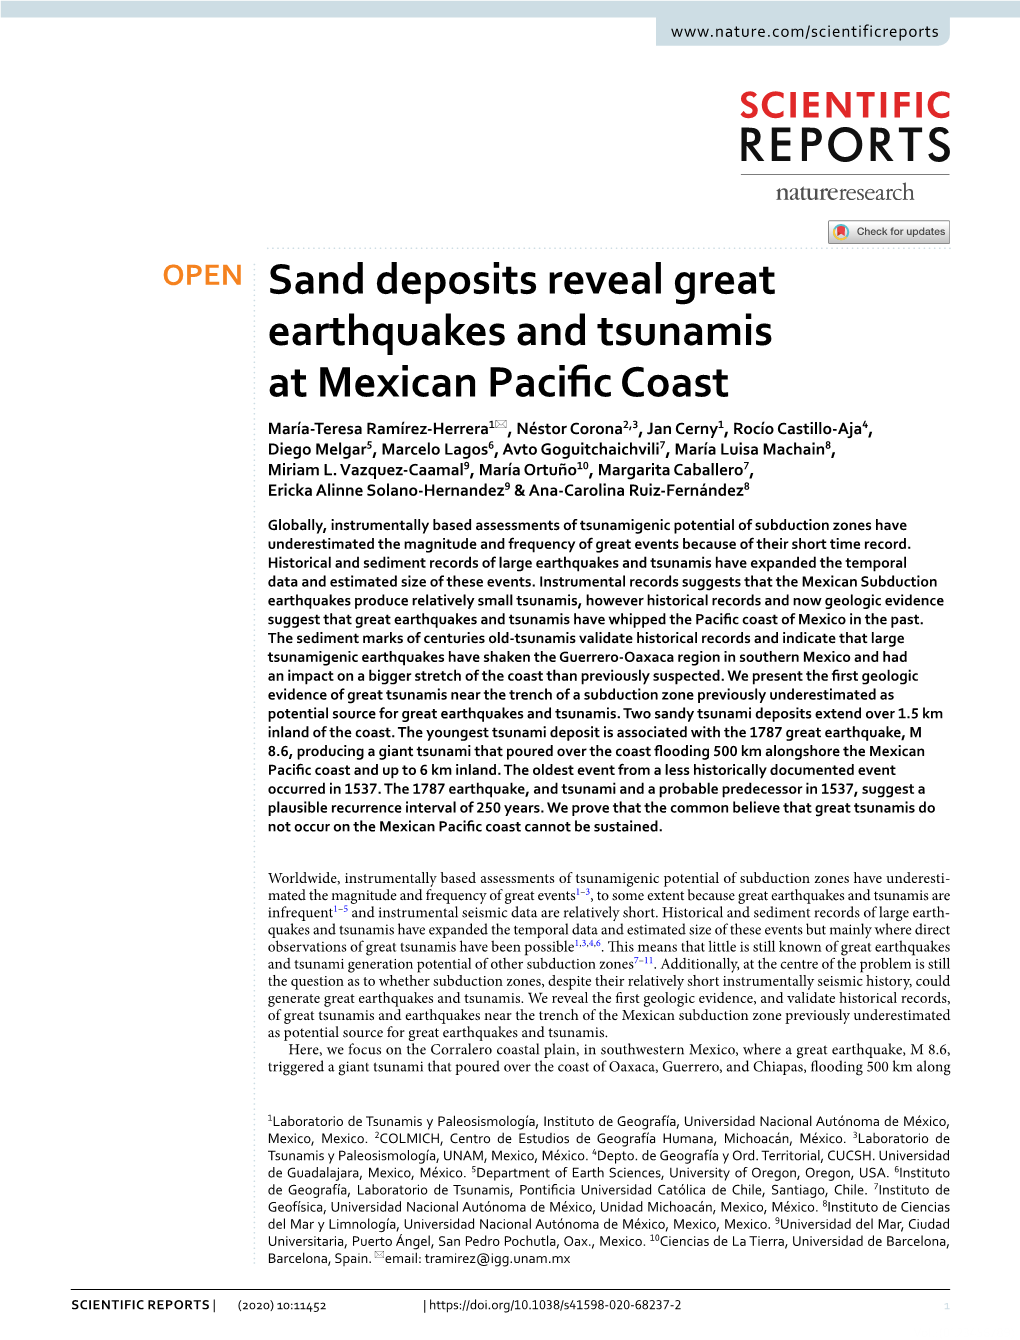 Sand Deposits Reveal Great Earthquakes and Tsunamis at Mexican Pacific Coast